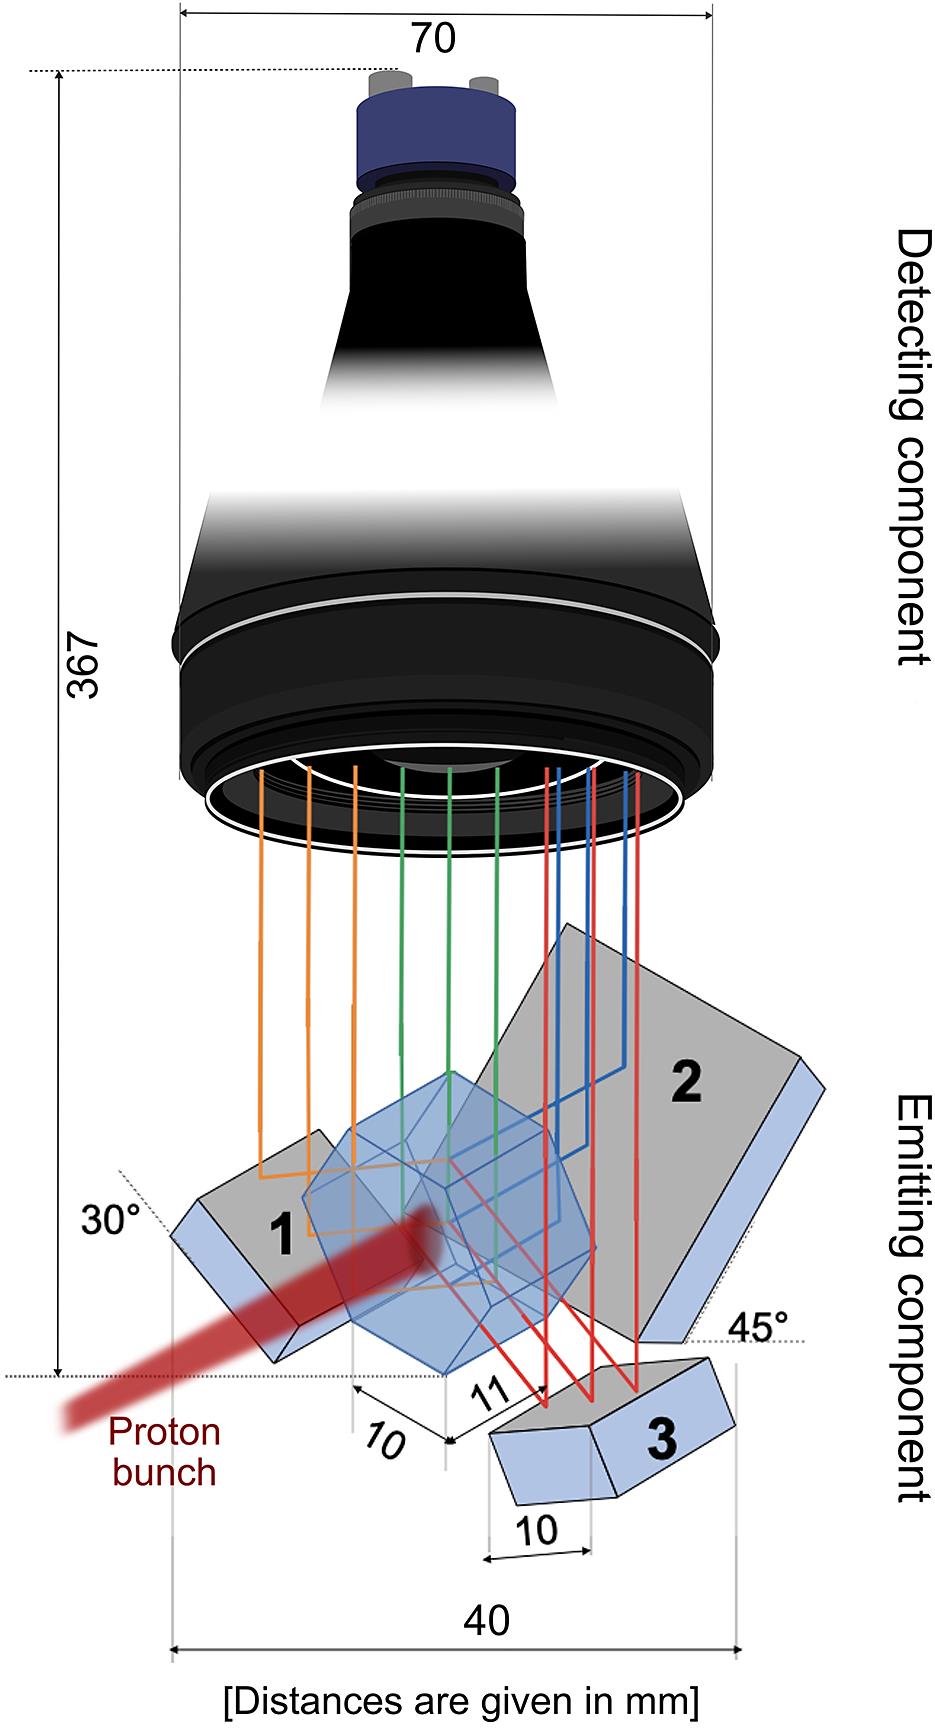 The miniSCIDOM detector consists of a plastic scintillator shaped like a regular hexagonal prism. It is imaged via three mirrors, a bi-telecentric objective and a CCD camera.